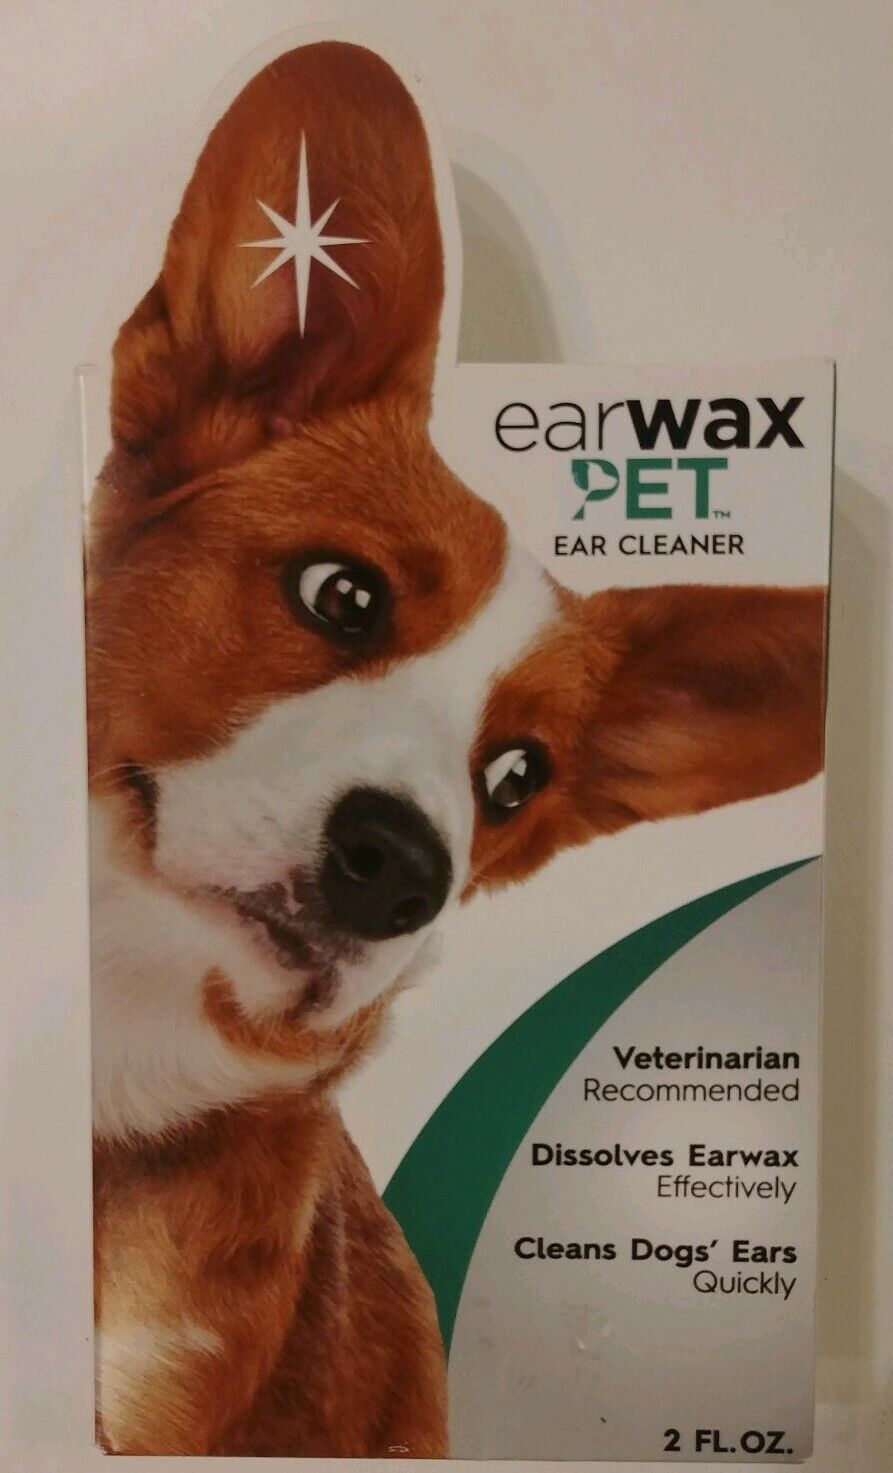 Earwax Eosera Pet Ear Cleaner For Dogs Veterinarian Recommended New